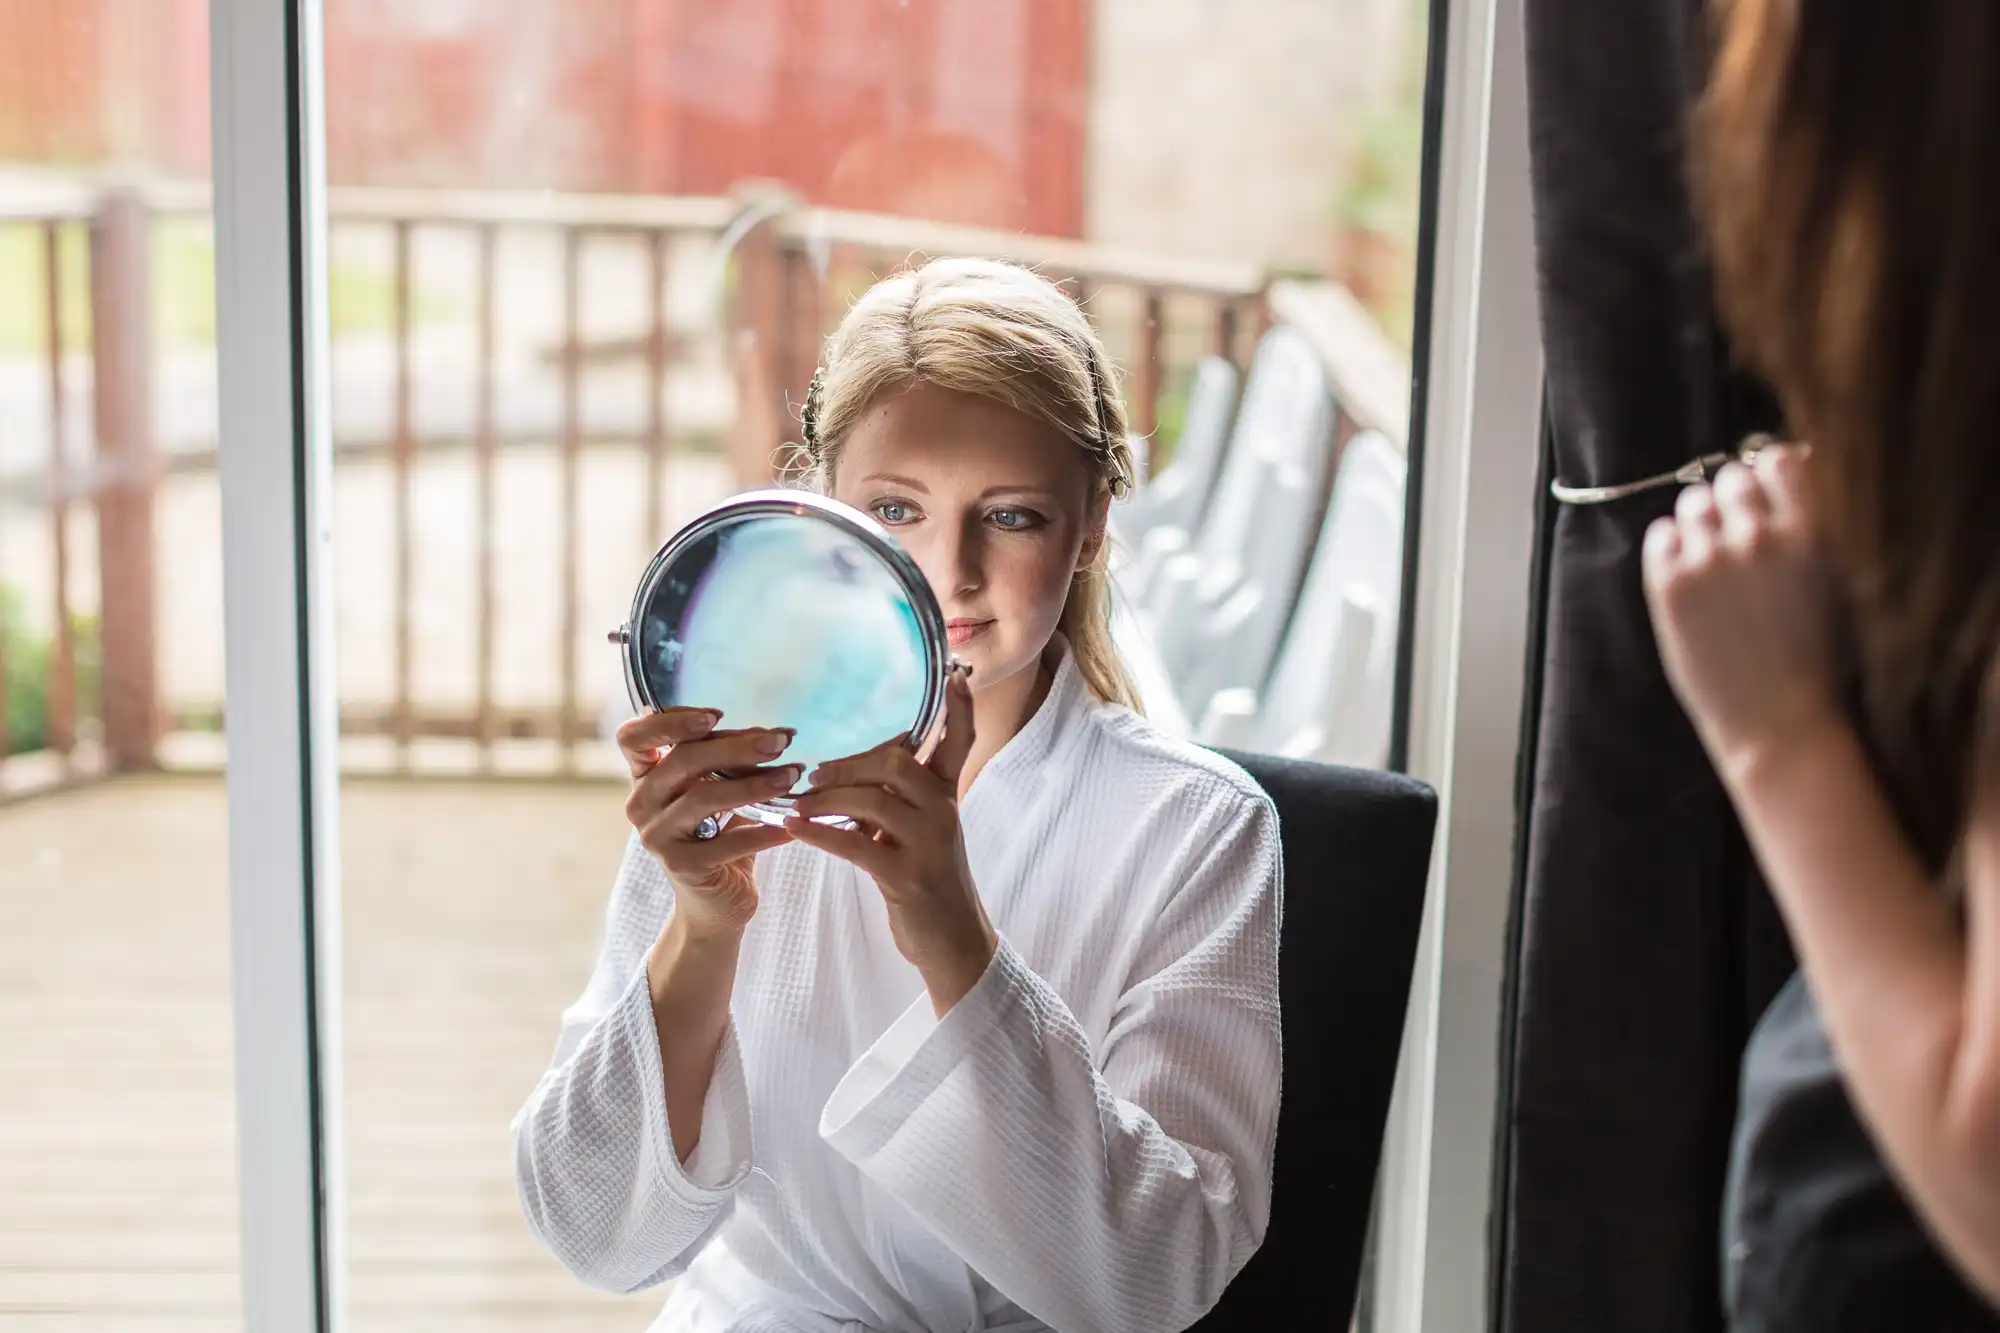 A woman in a white robe holding a mirror and applying makeup, sitting near glass doors with a reflection visible.